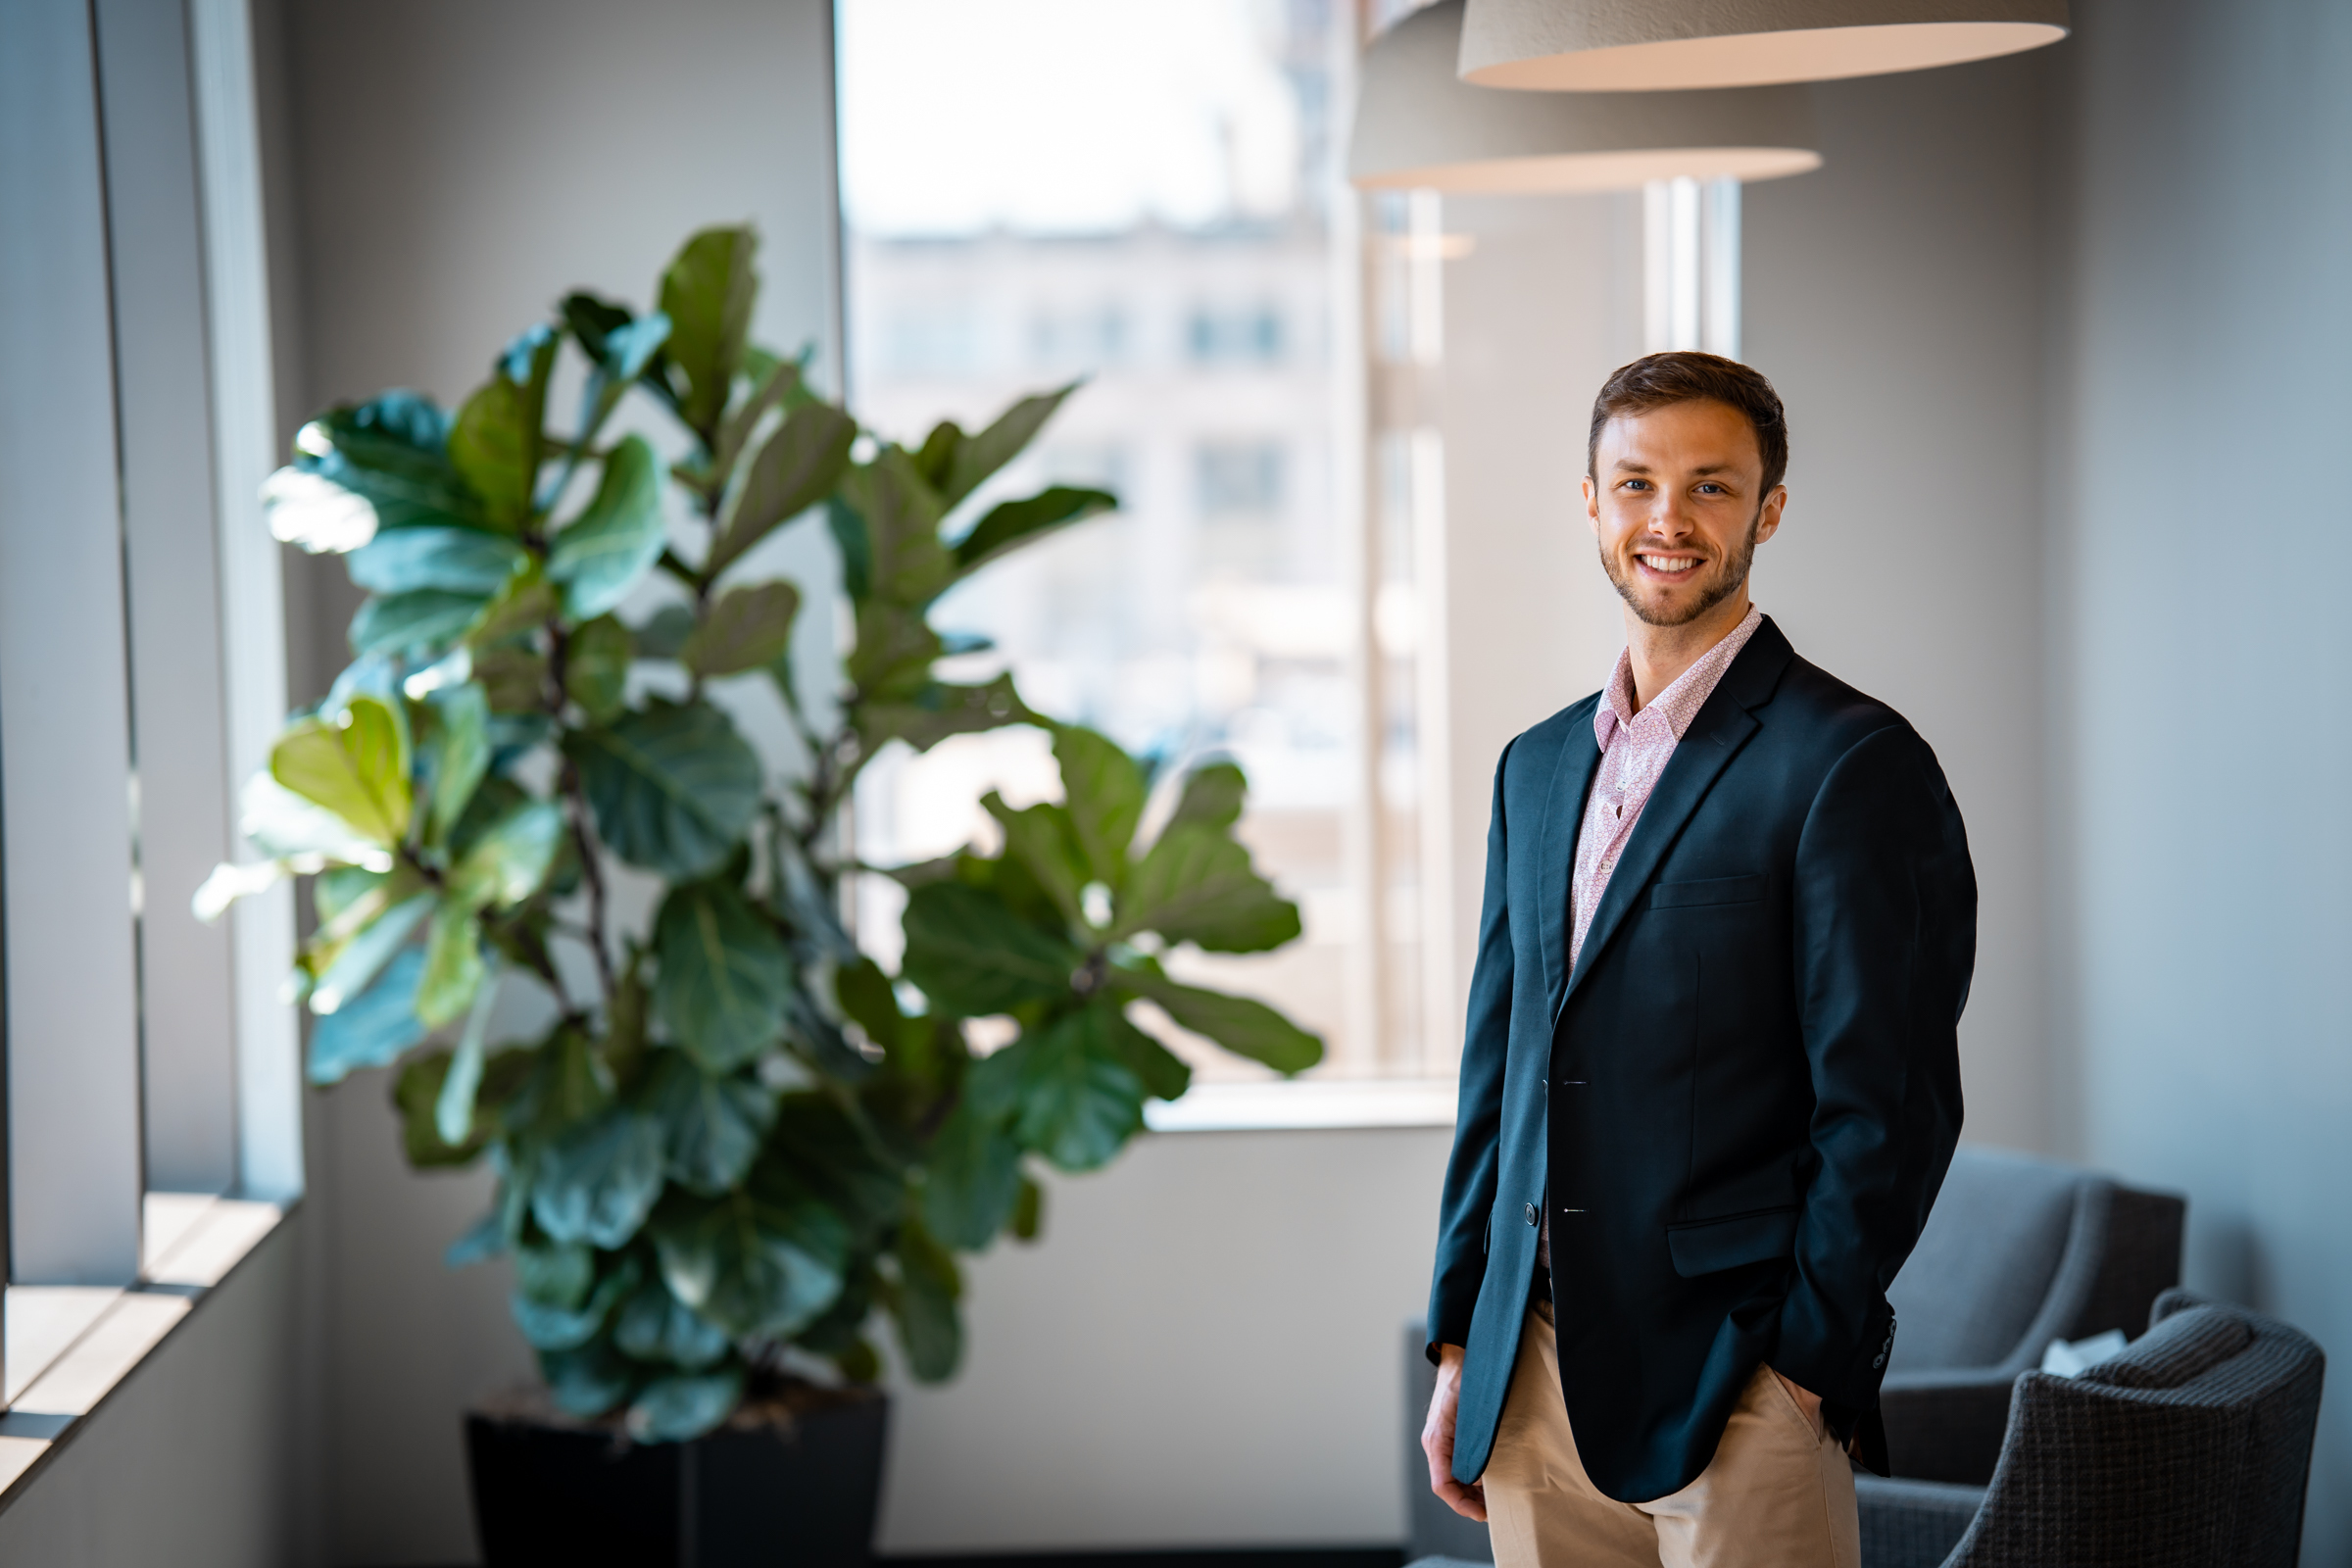 Photo of Keenan Hawekotte standing in the office and smiling next to a fiddle leaf fig tree